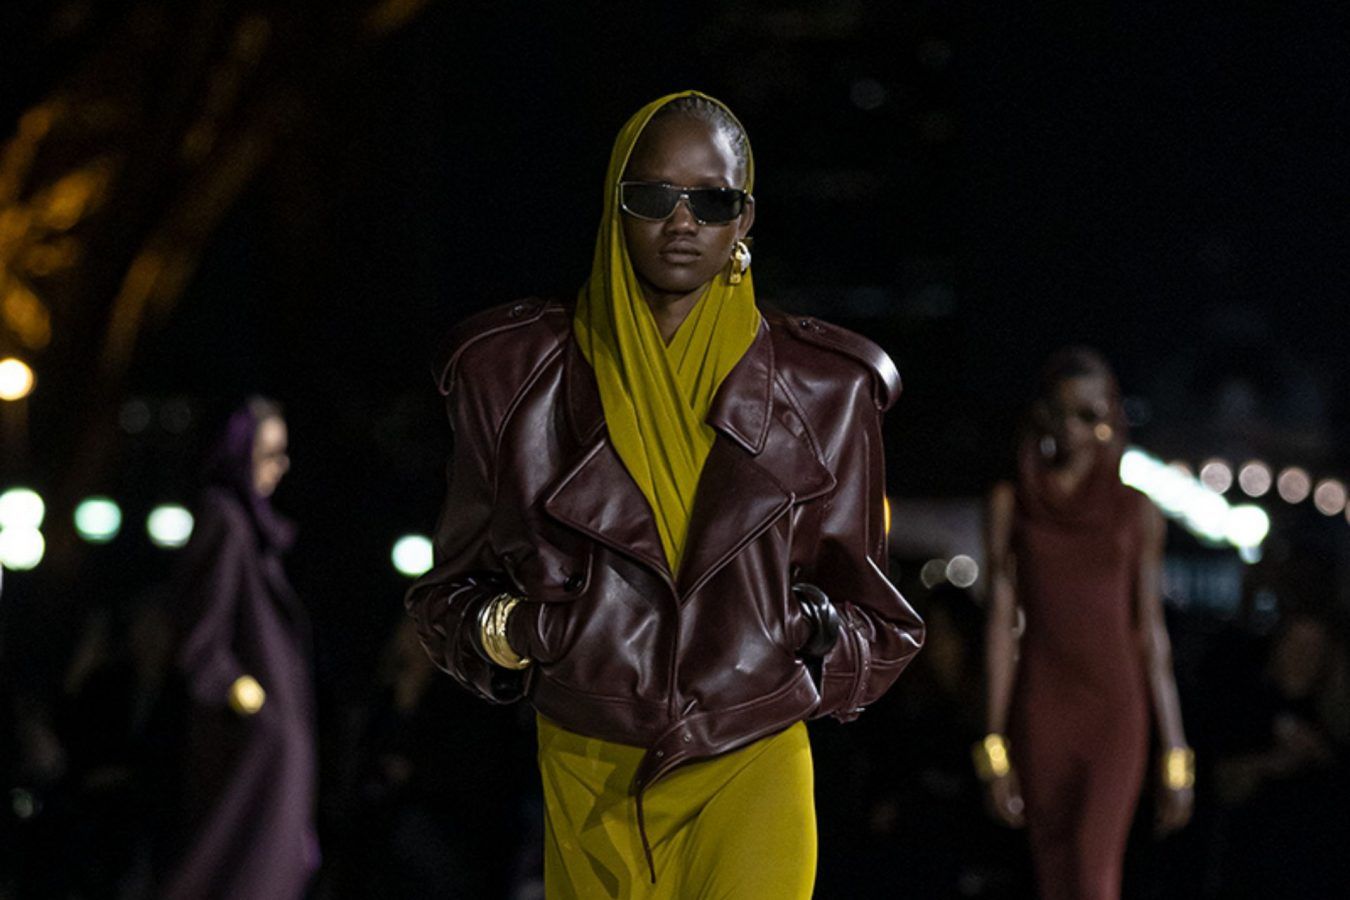 Paris Fashion Week Spring/Summer 2022: See All The Best Looks Here